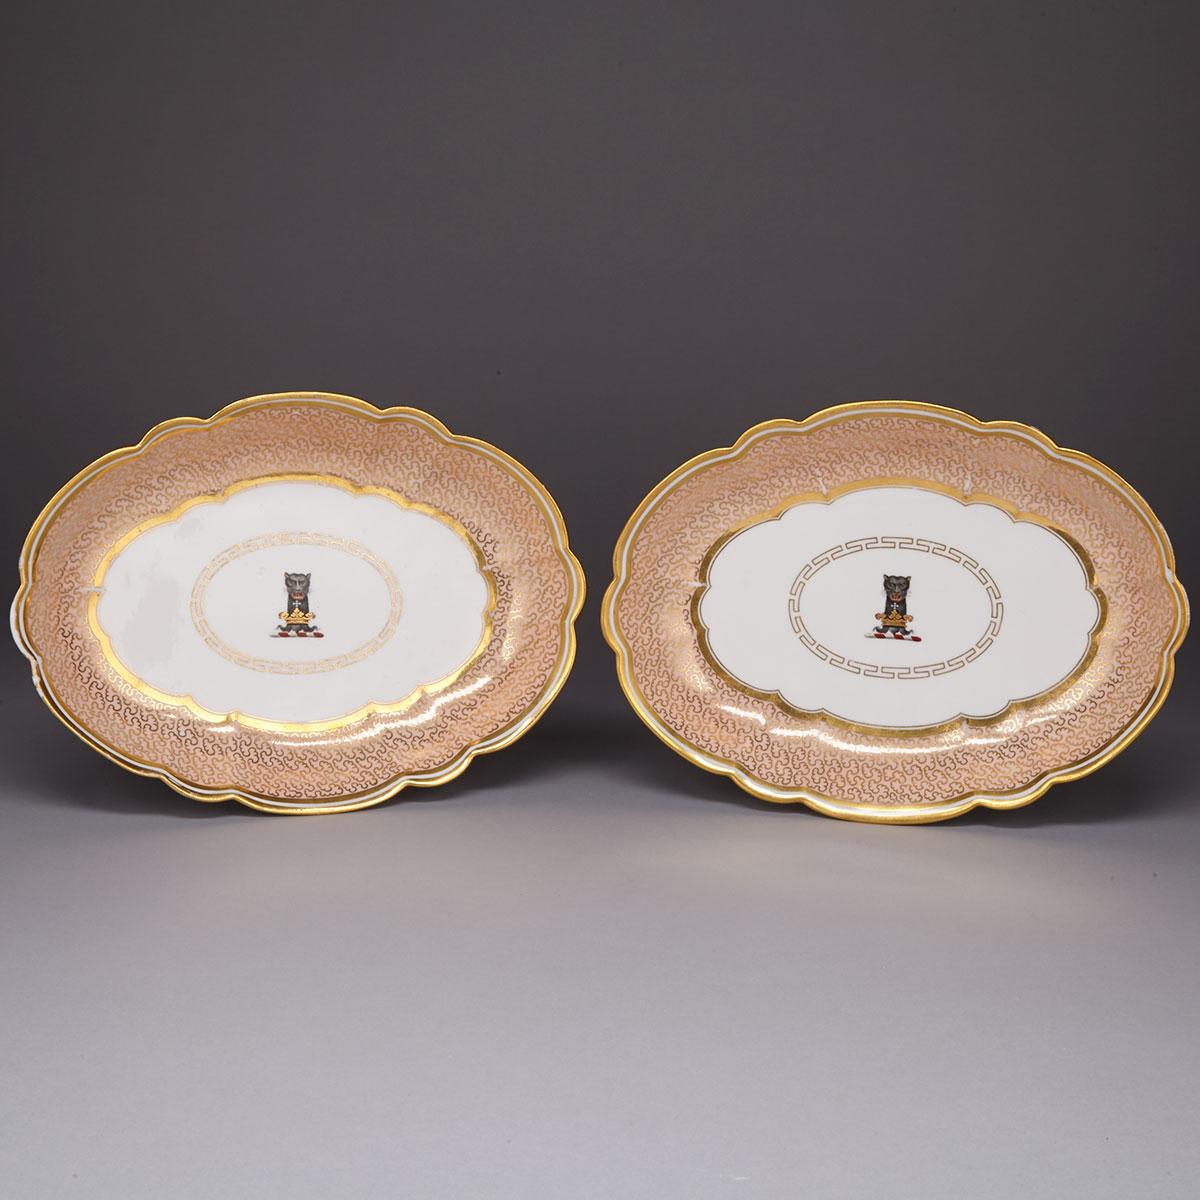 Pair of Barr, Flight & Barr, Worcester Armorial Oval Dishes, c.1810-13